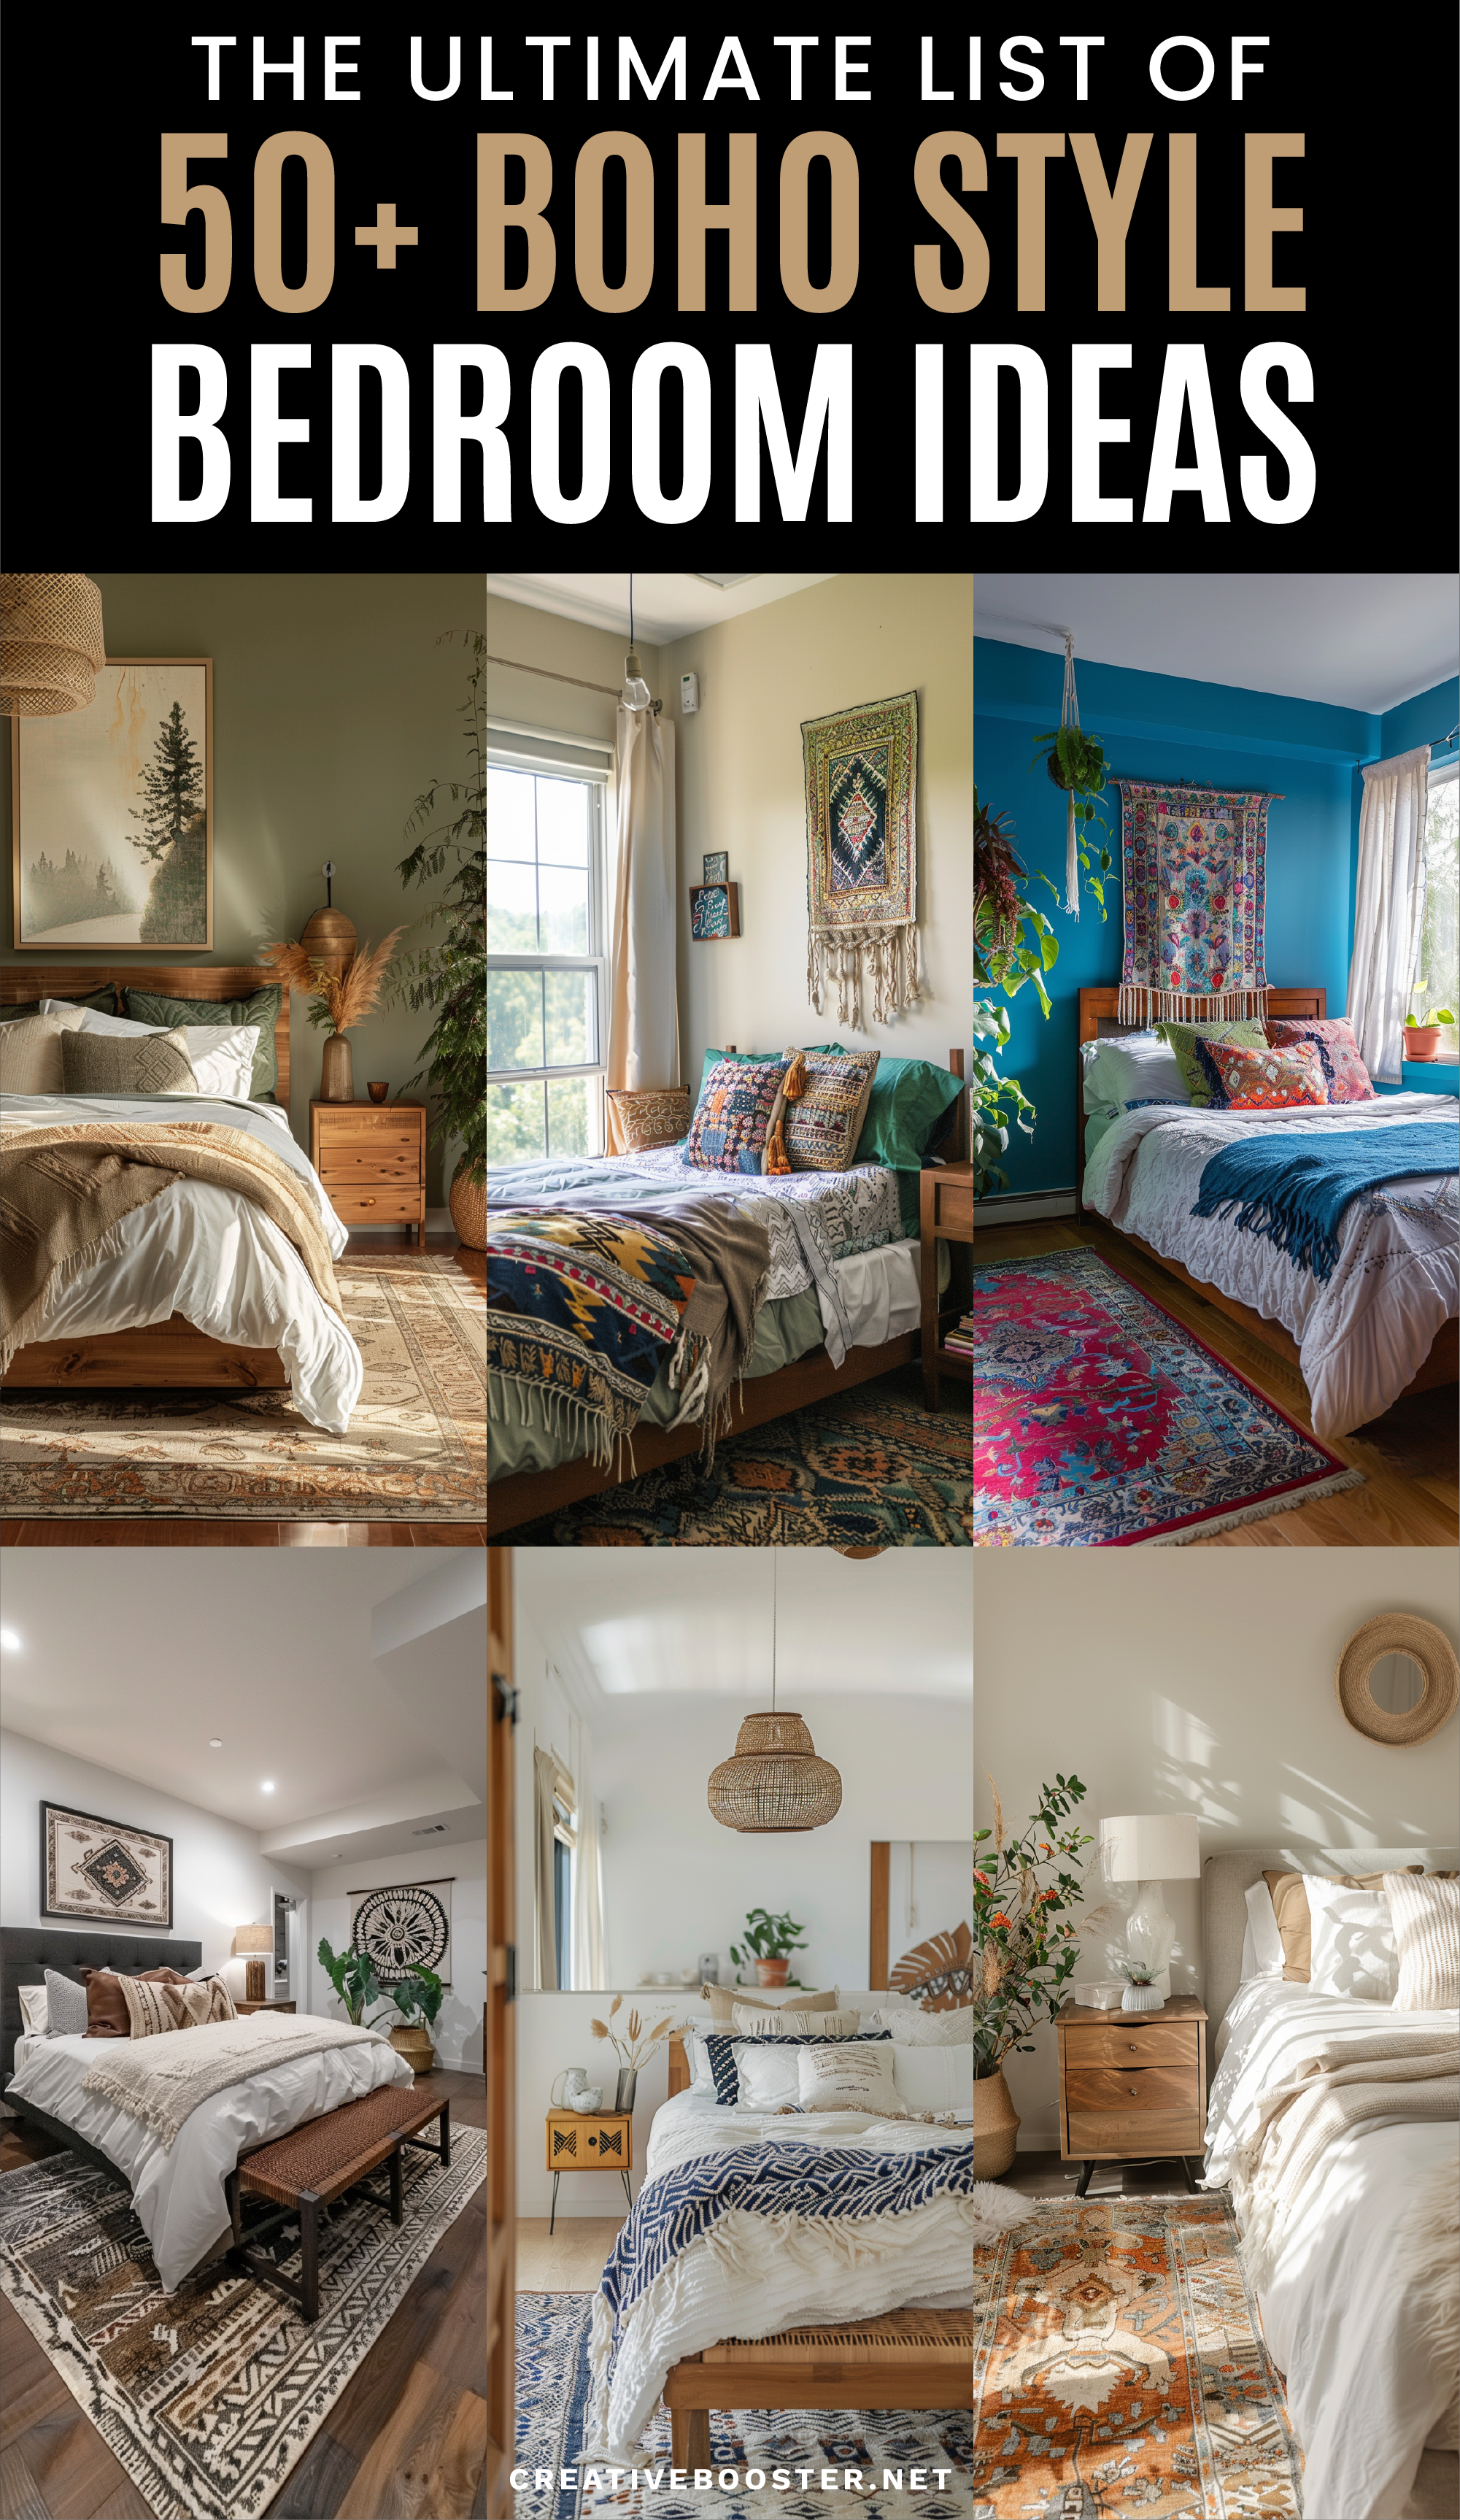 Boho-Bedroom-Ideas-(Home-Decoration-and-Design-Inspiration) Own Tall